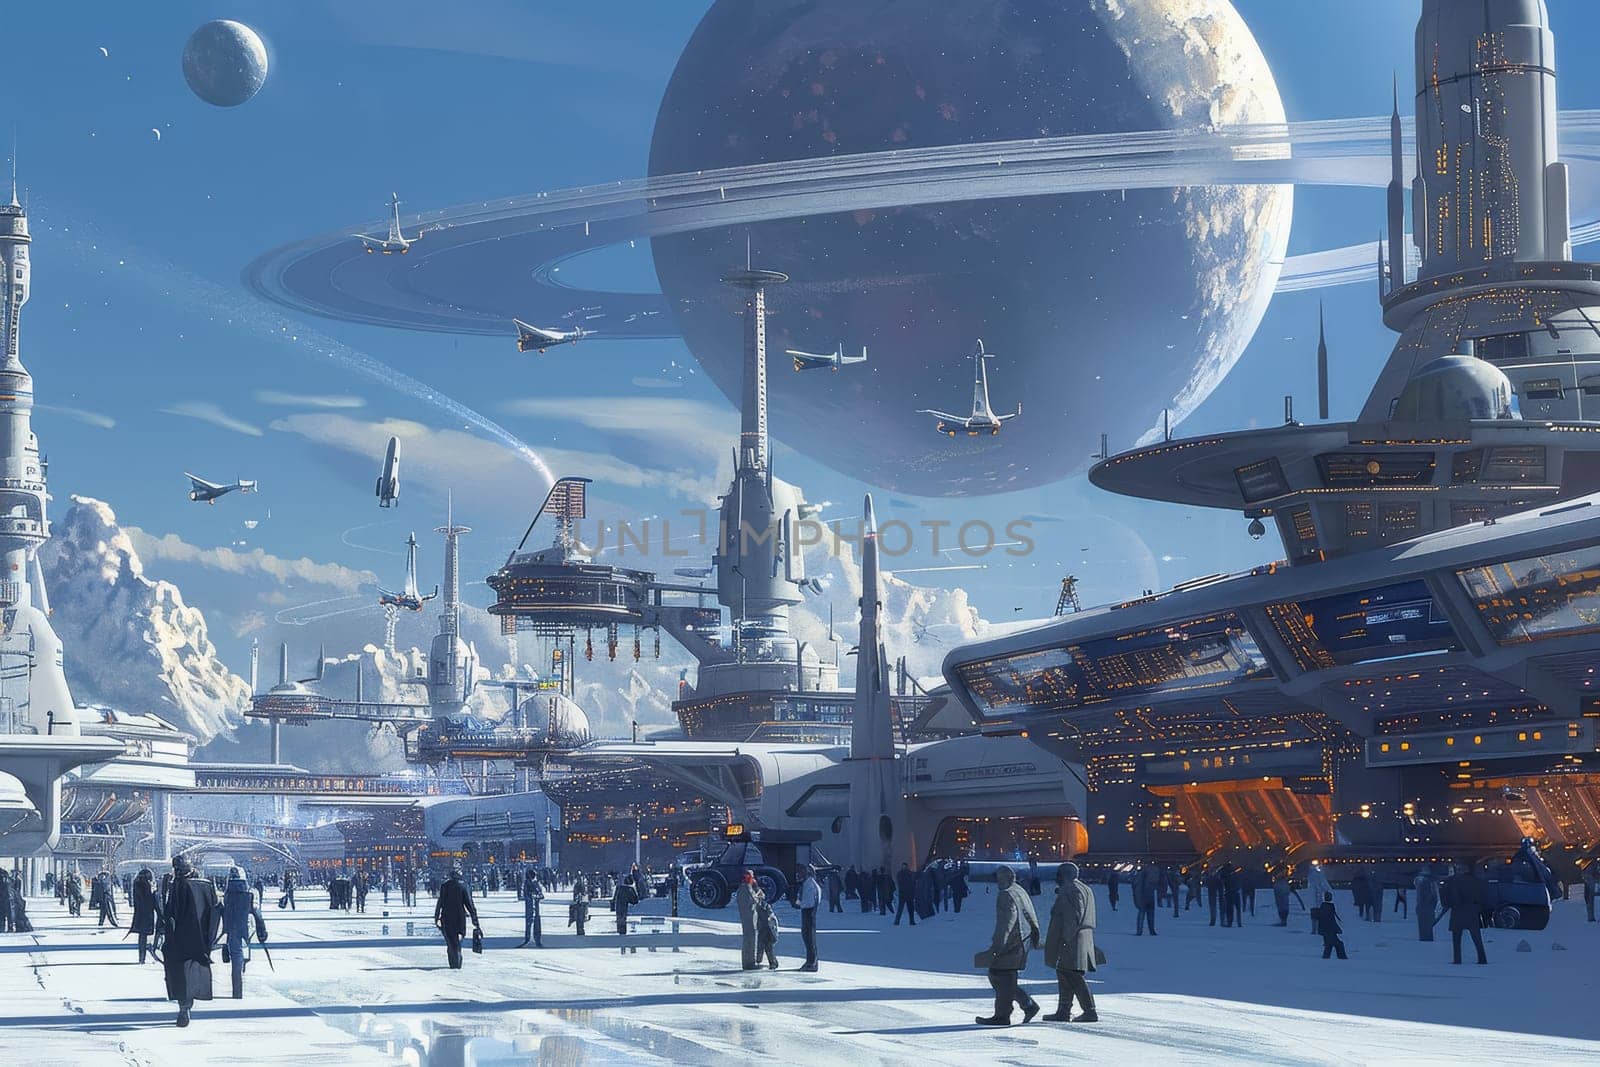 The image captures a state-of-the-art spaceport teeming with shuttles and activity, signifying human advancements and the busy nature of interstellar travel